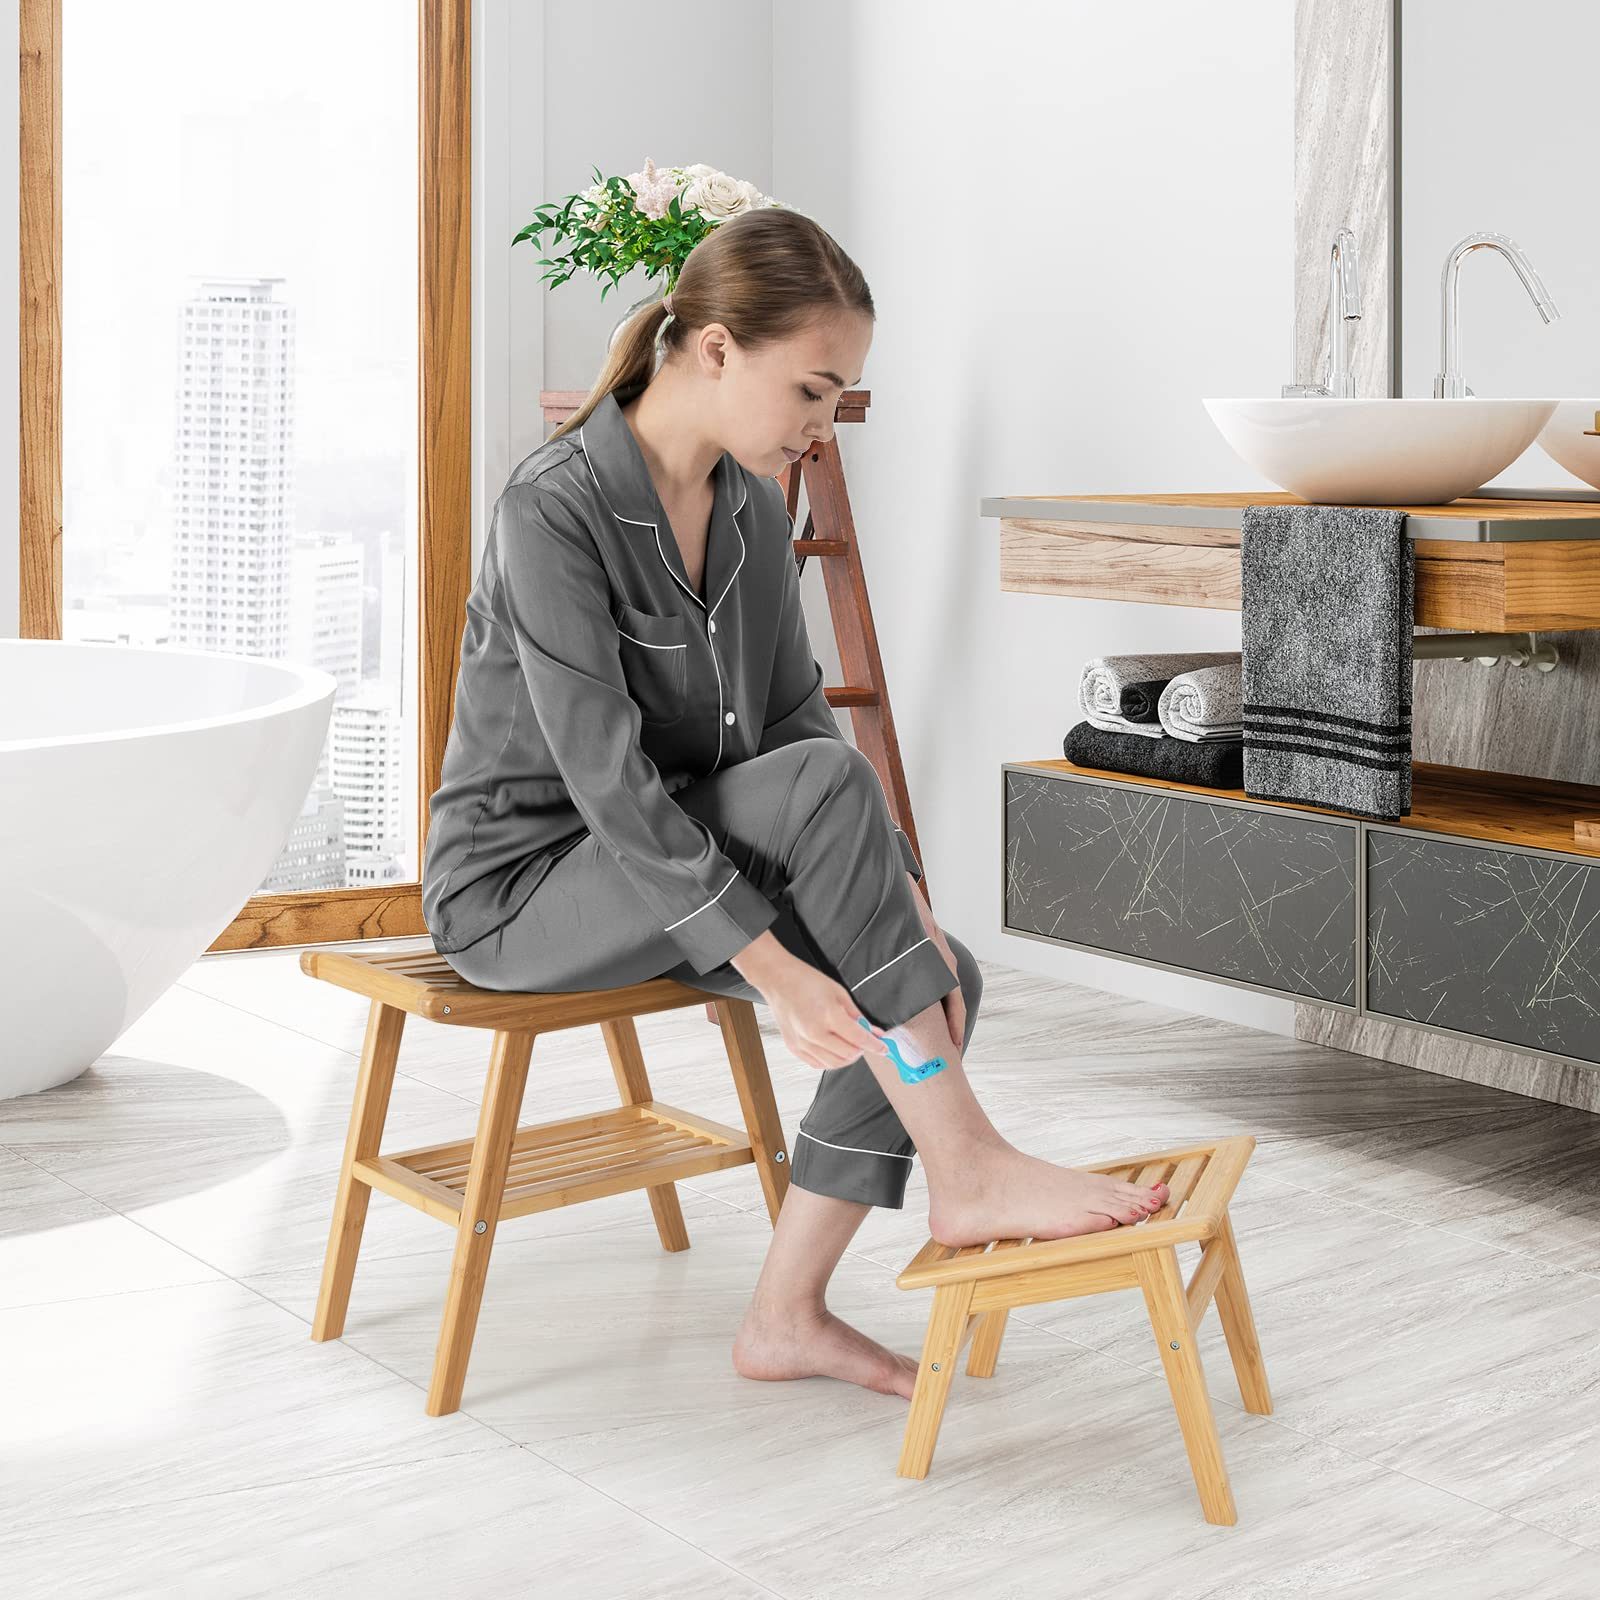 Bamboo Shower Bench with Foot Stool, Shower Seat Bench with Underneath Storage Shelf